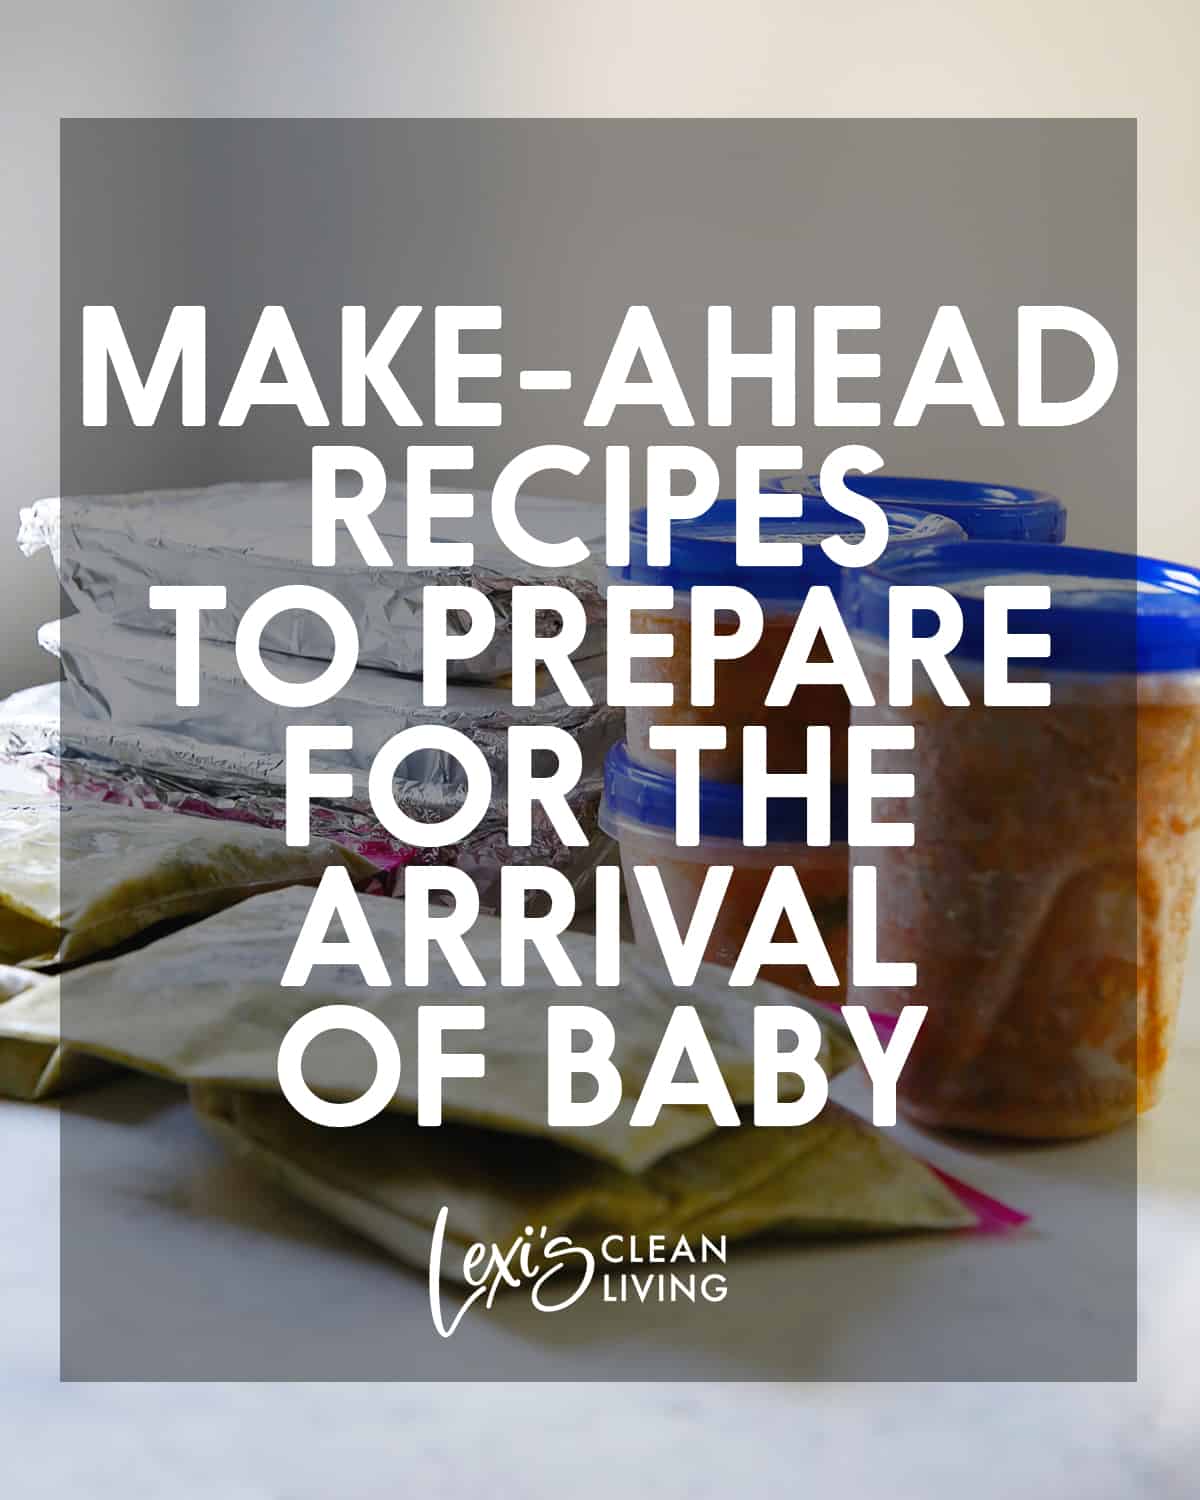 Make Ahead Recipes for Baby